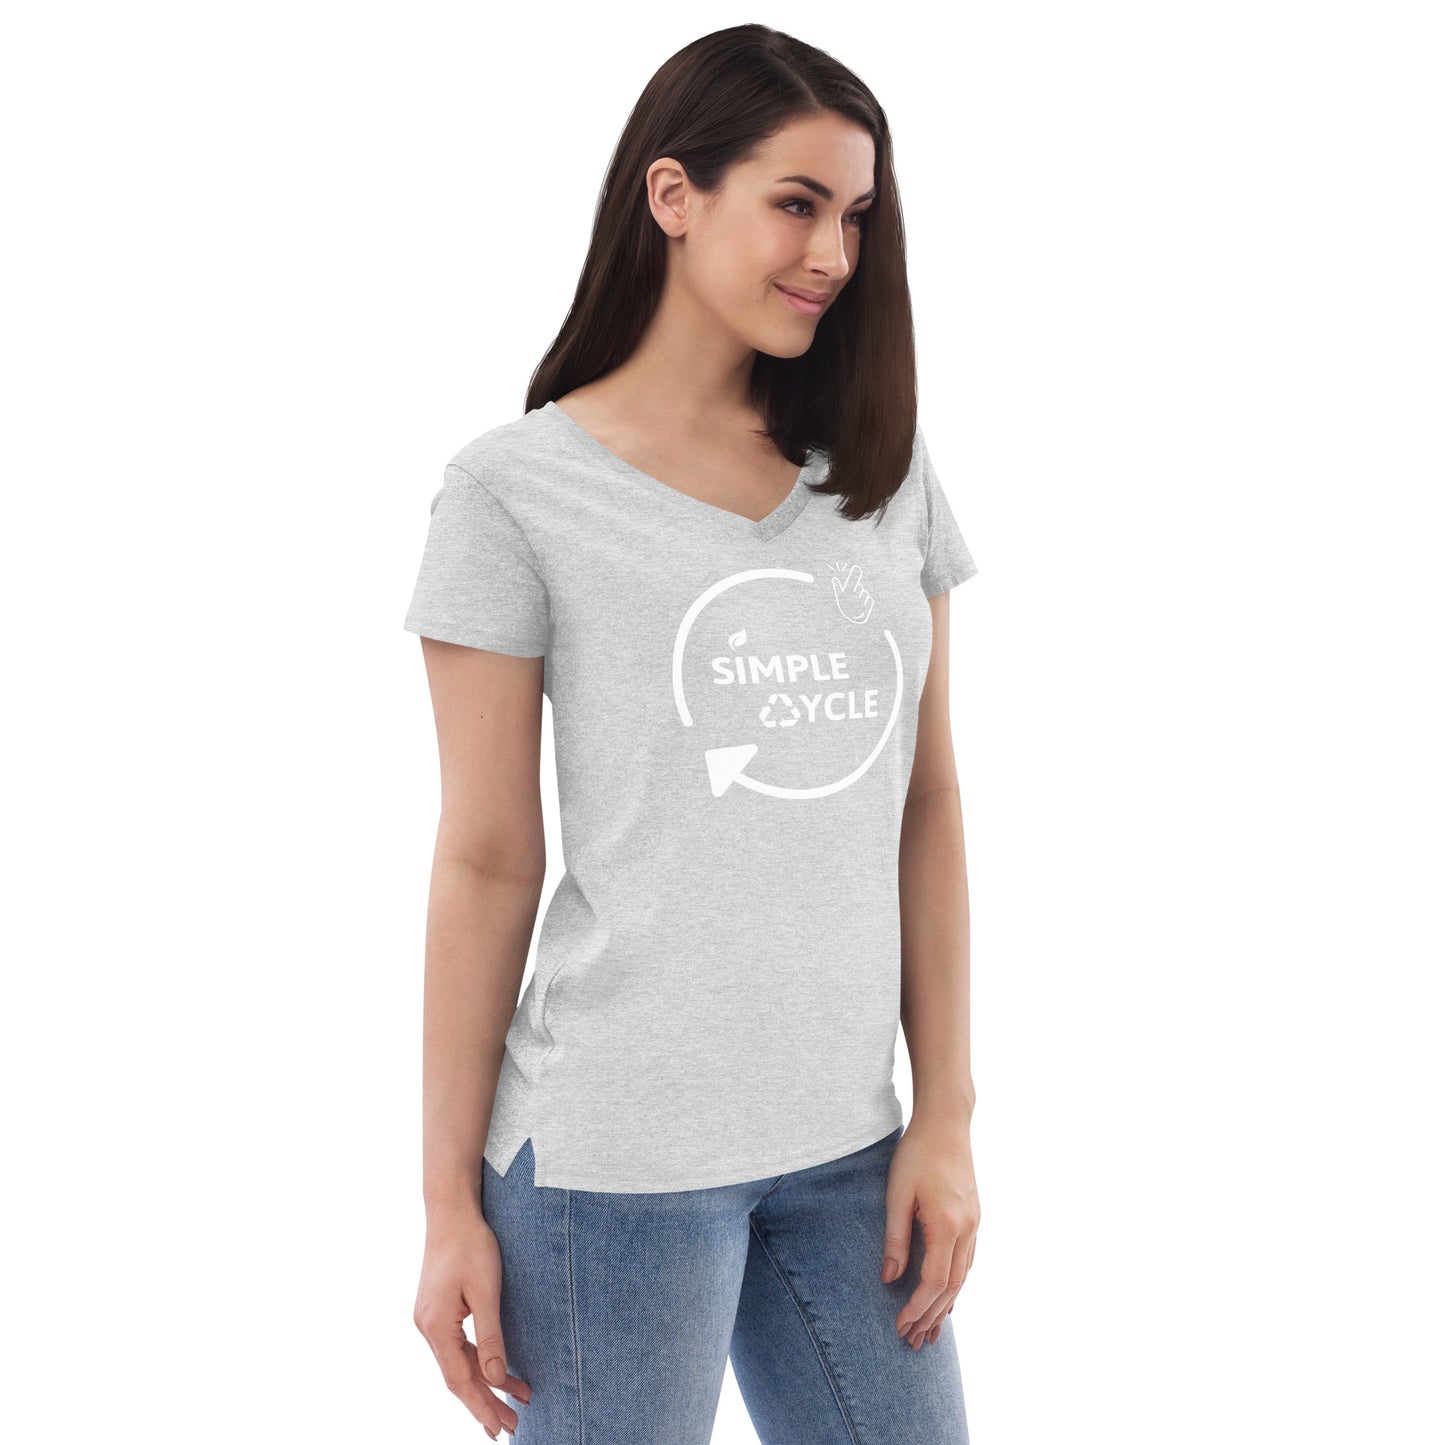 SimpleCycle Women’s Recycled V-Neck T-Shirt heather grey right front